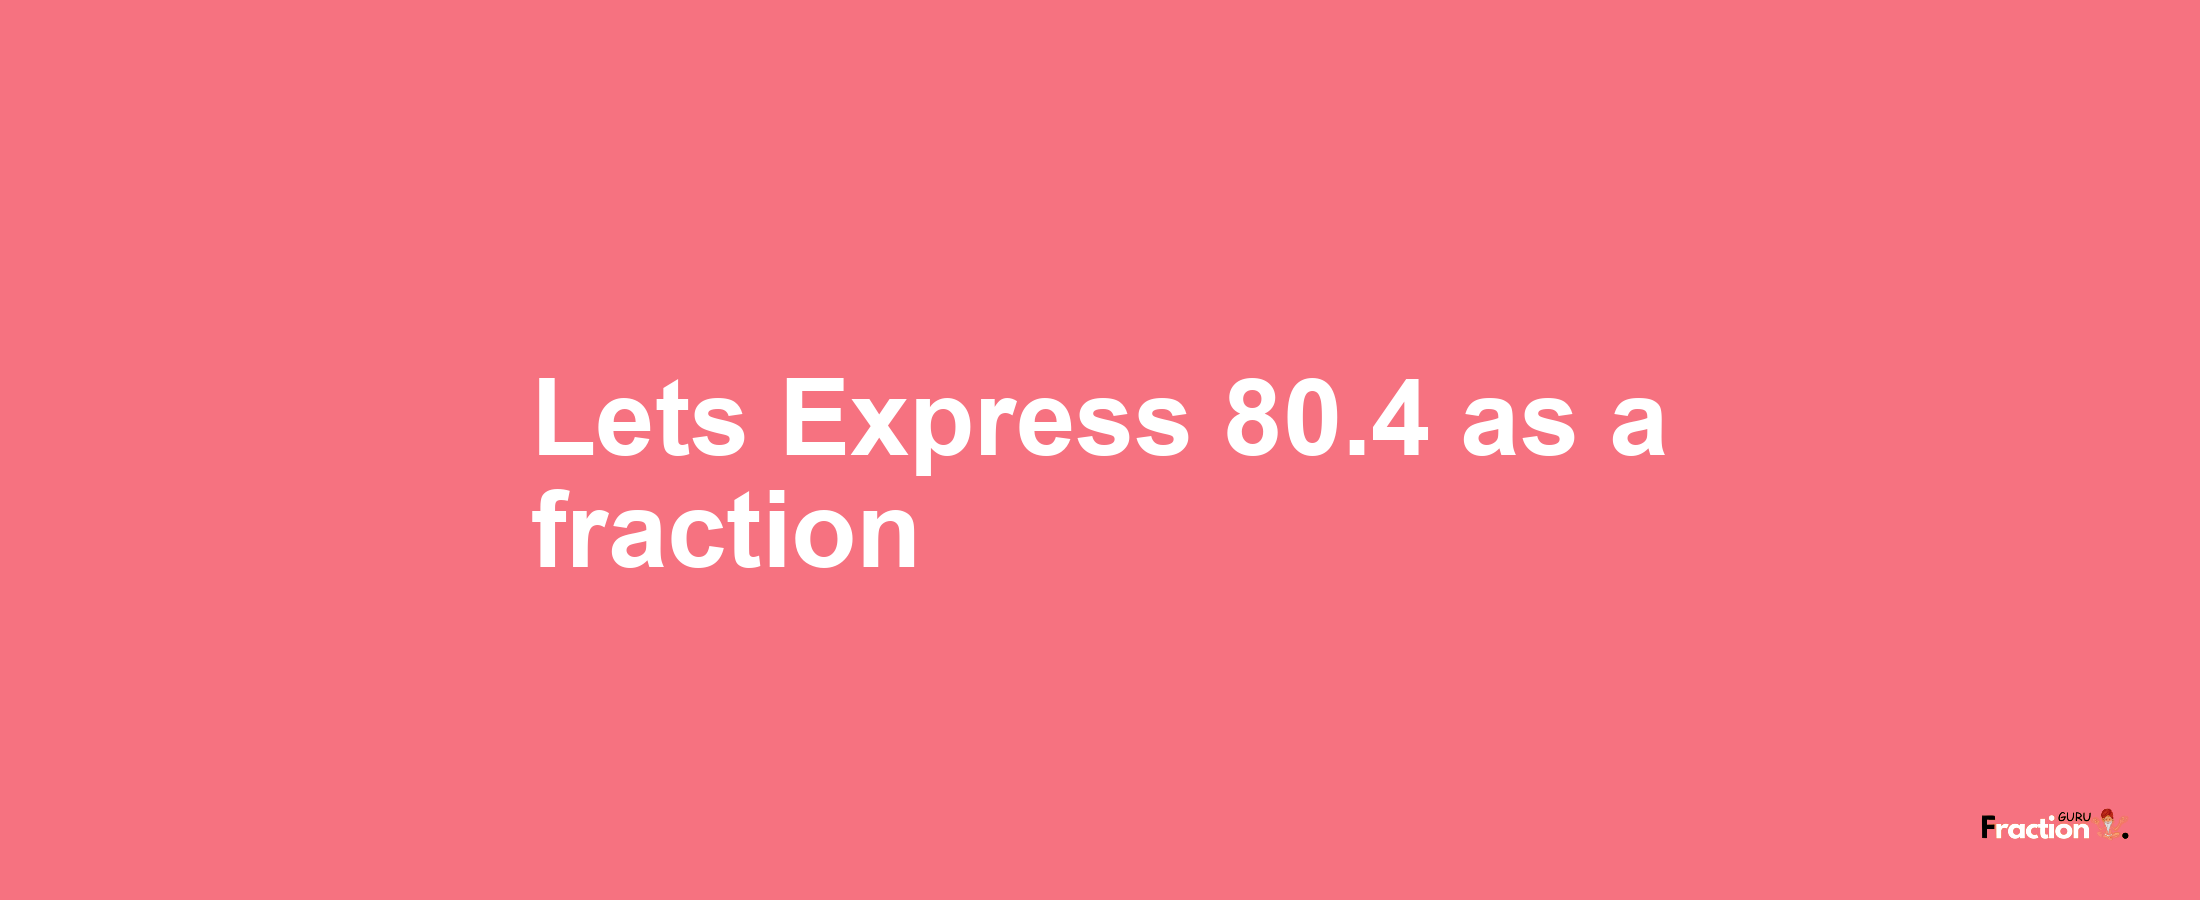 Lets Express 80.4 as afraction